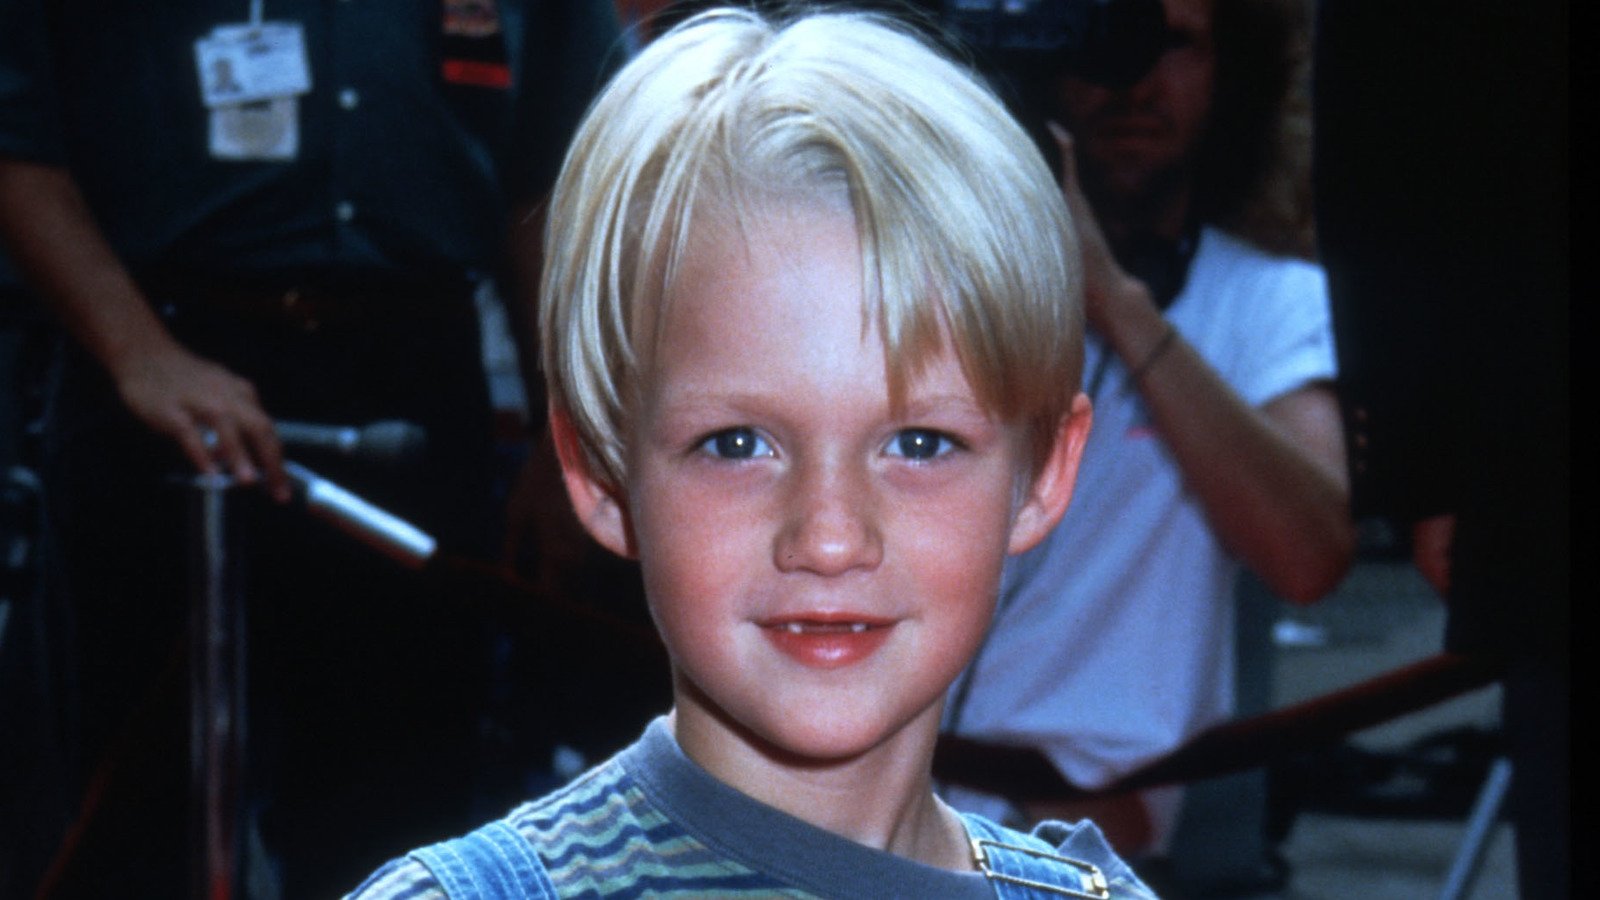 This Dennis The Menace Star Grew Up To Be Unrecognizably Gorgeous - Nicki Swift